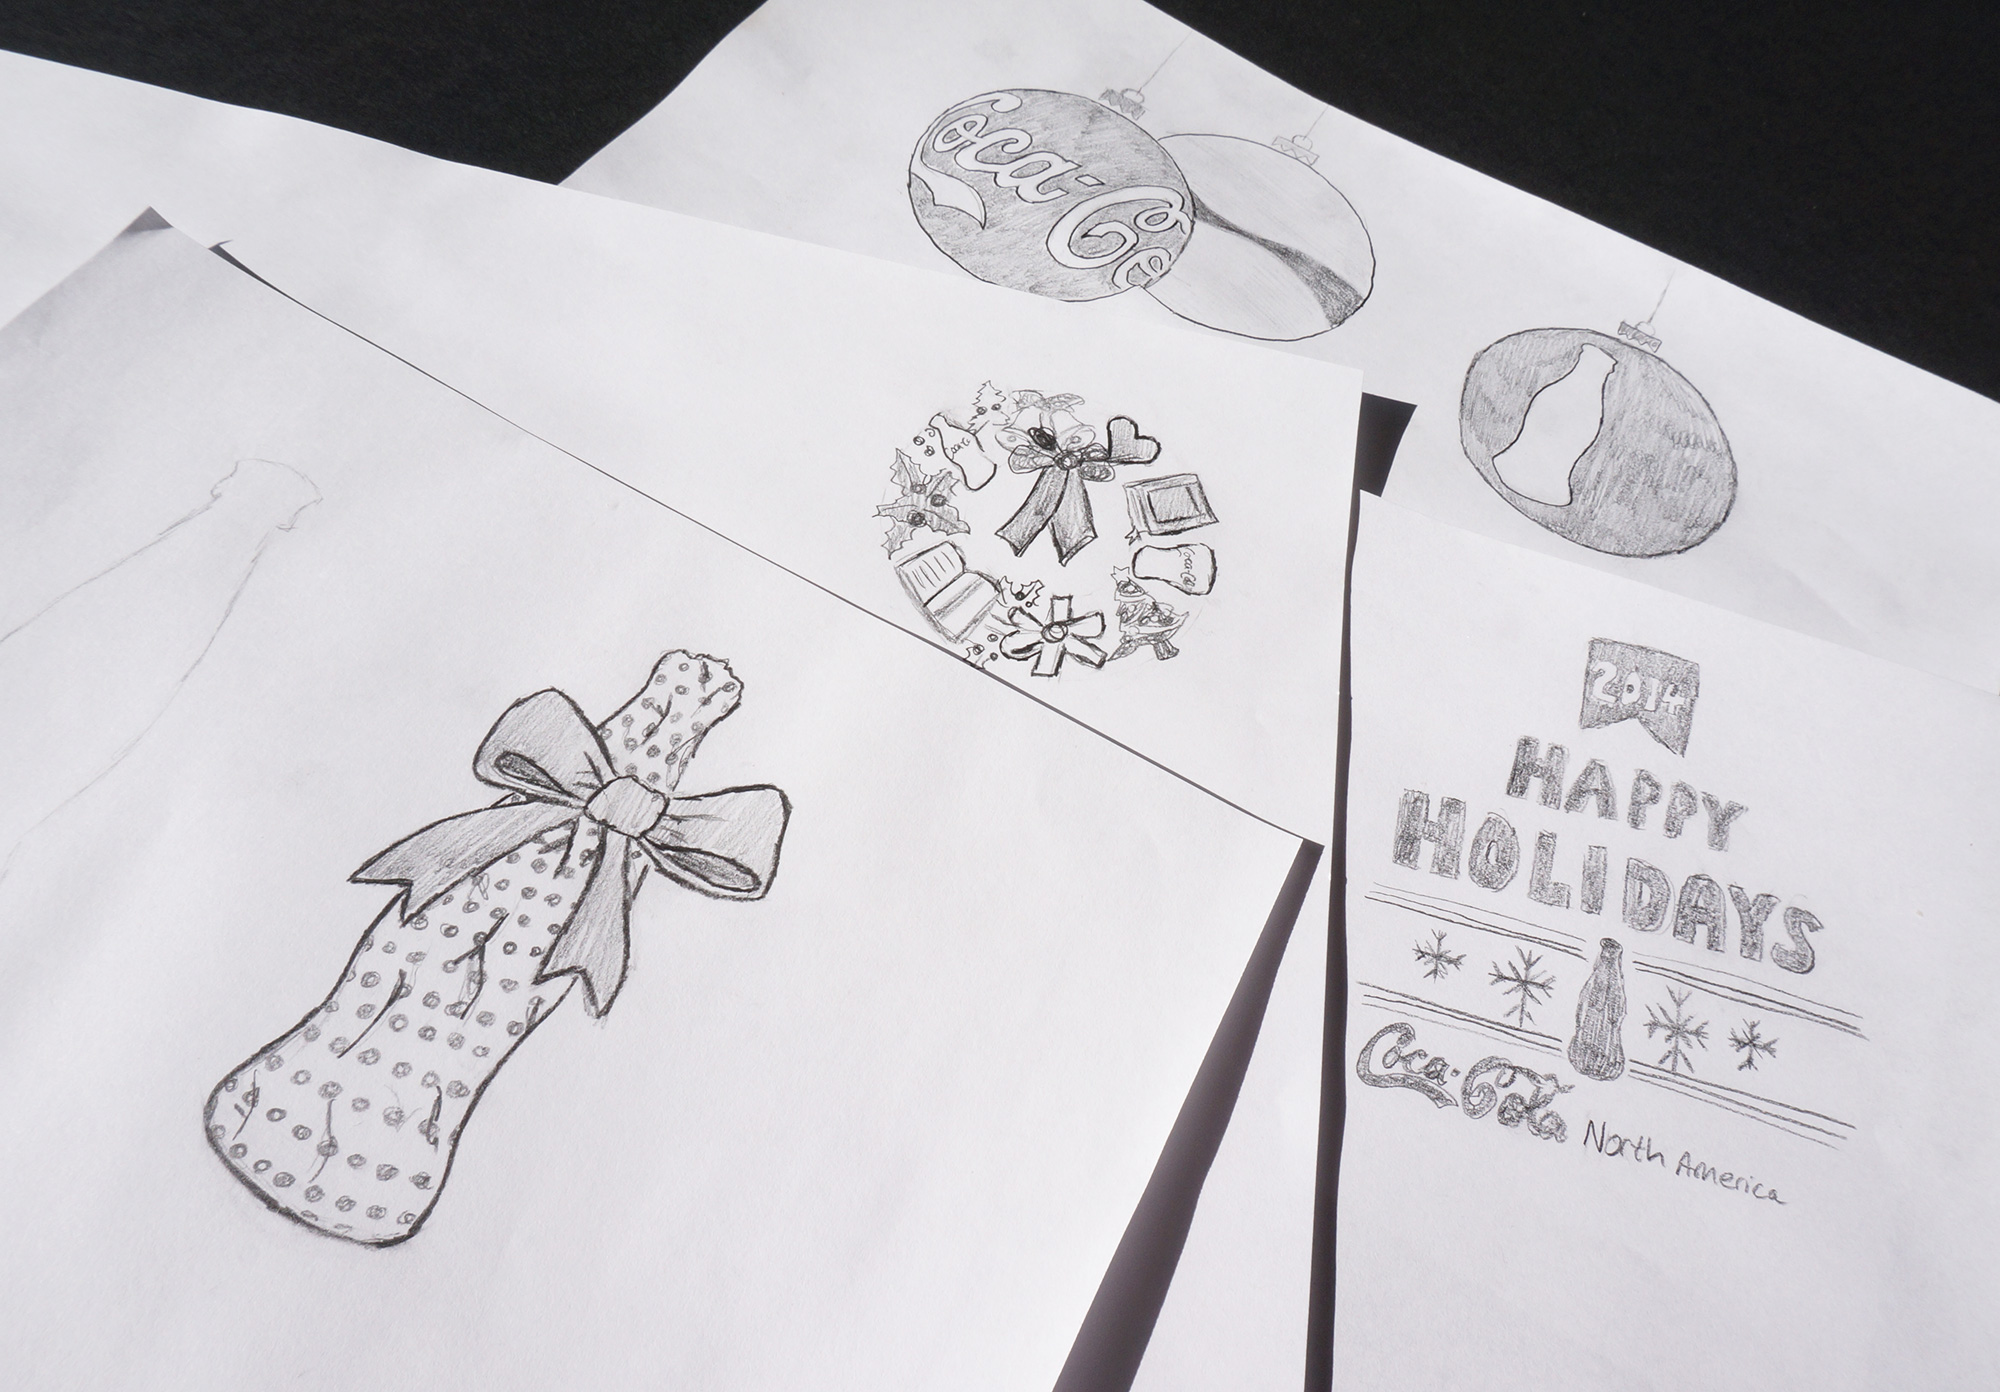 Holiday card sketches for Coca-Cola North America 2014